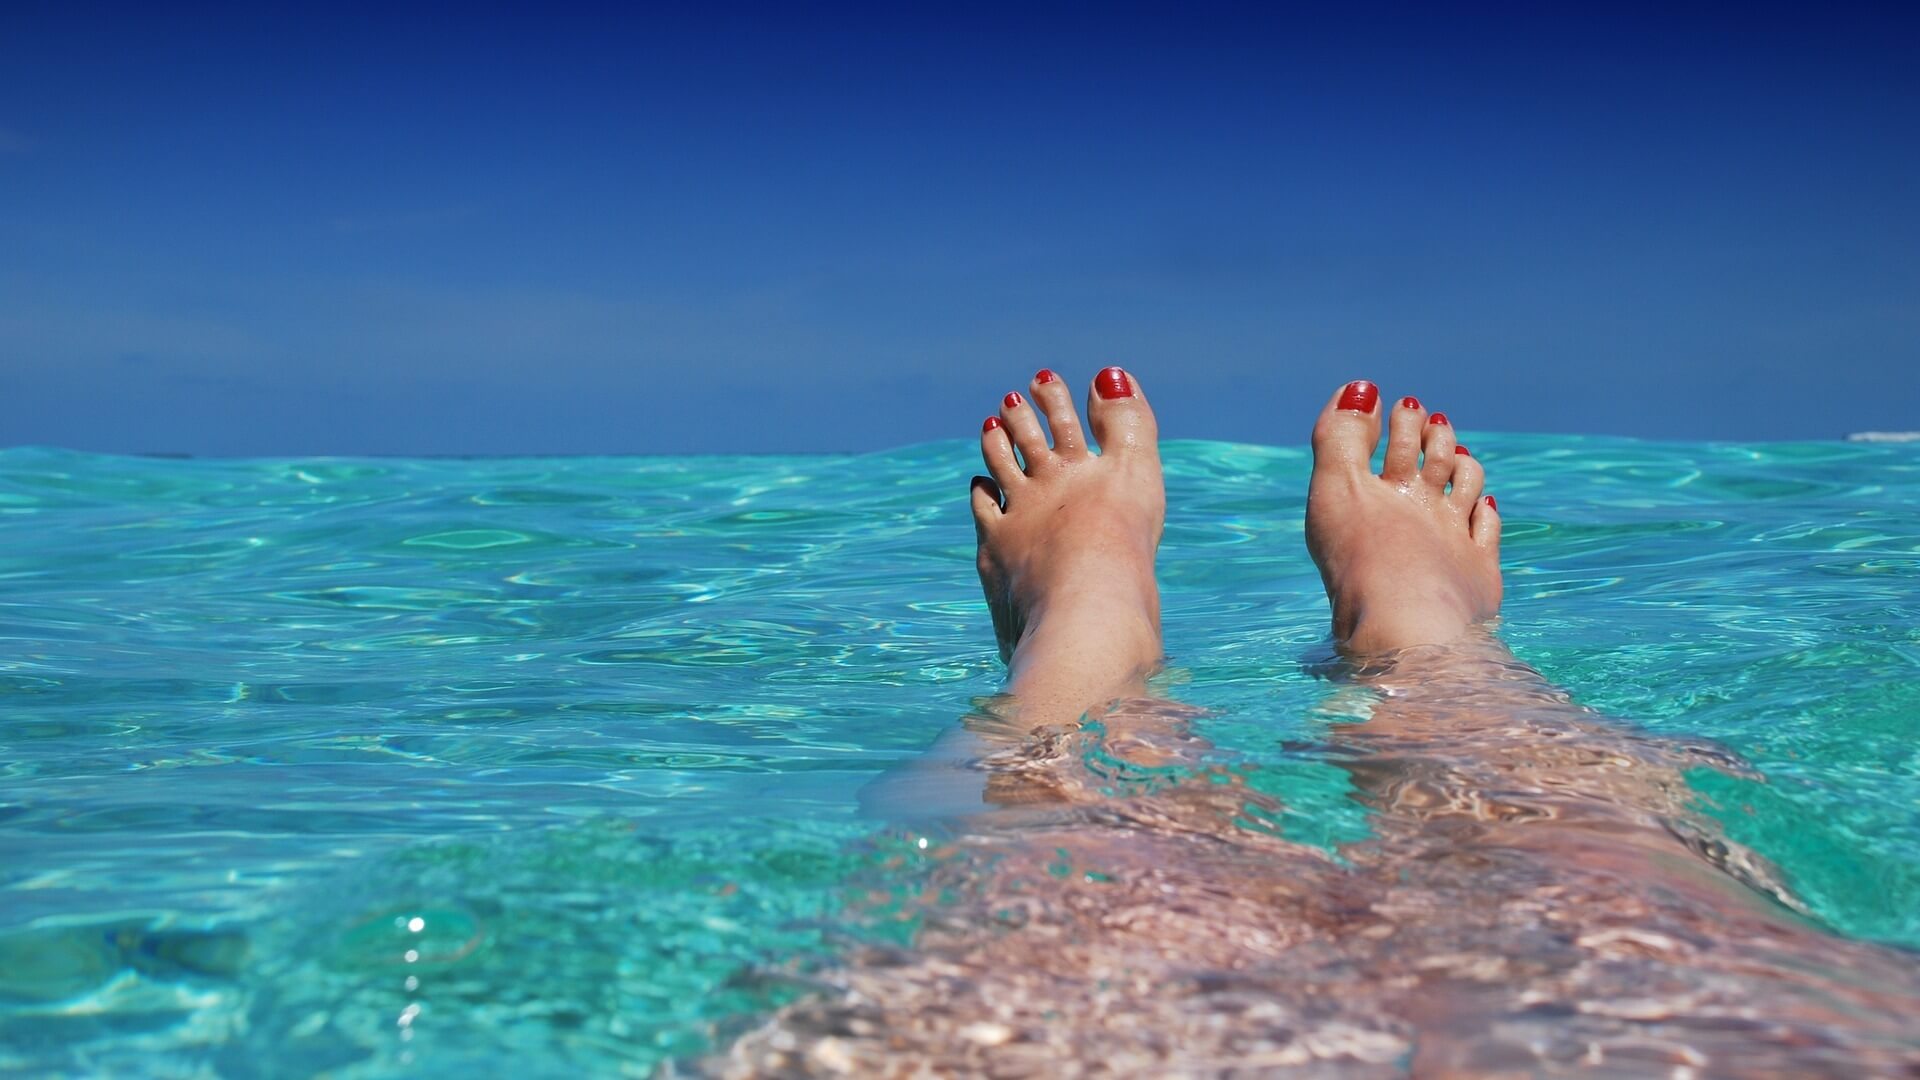 A woman's feet in the clear water of the ocean.